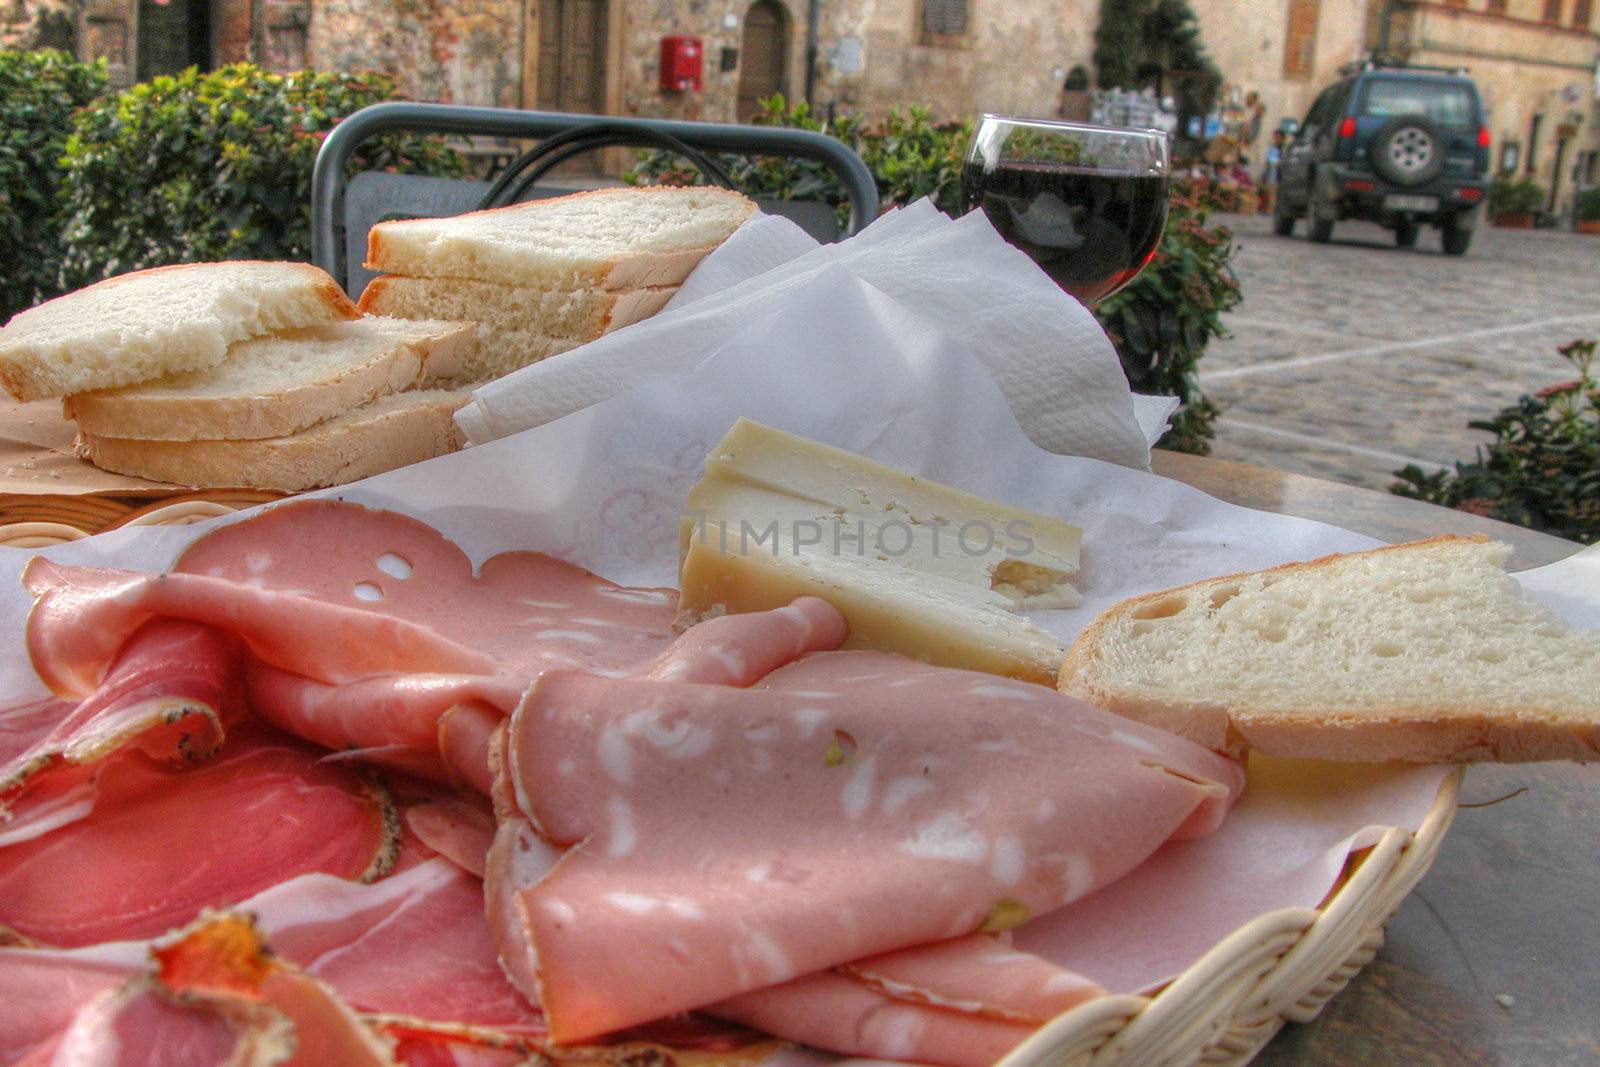 Tuscan Appetizer, Italy, 2003 by jovannig